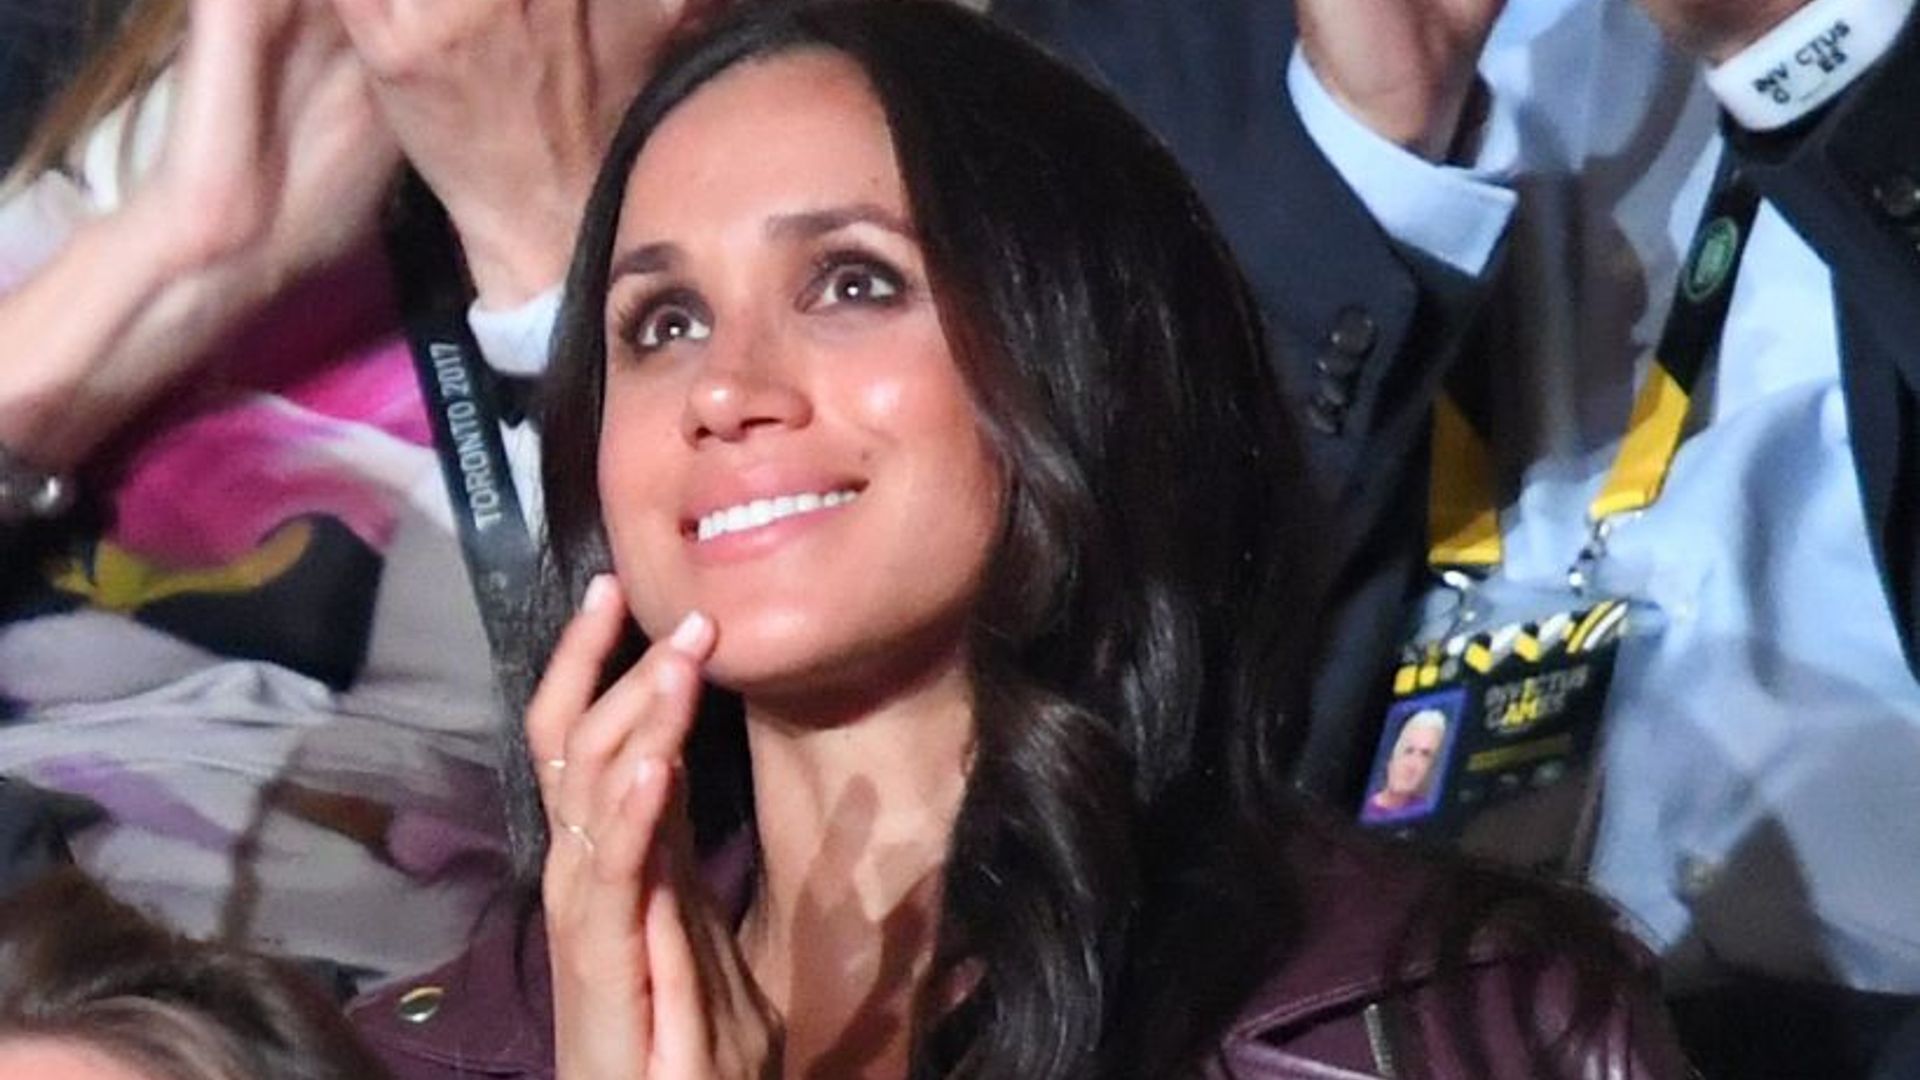 Meghan Markle is beautiful in burgundy at Invictus Games opening ceremony